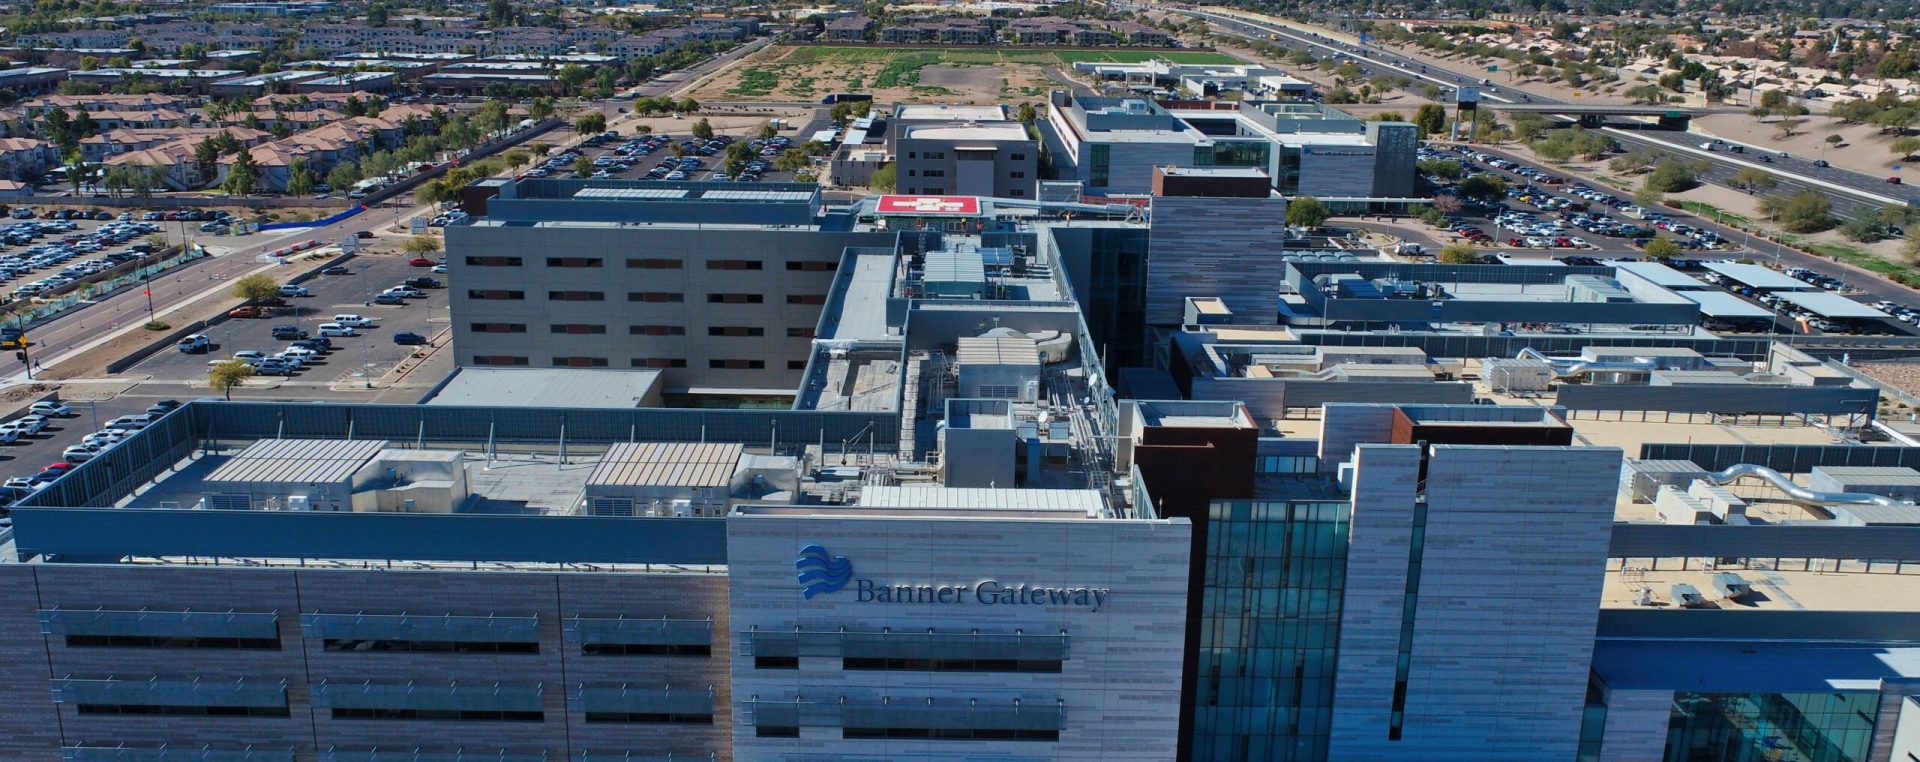 Aerial view of Banner MD Anderson Cancer Center with surrounding parking and landscaped areas in a sunny suburban setting.